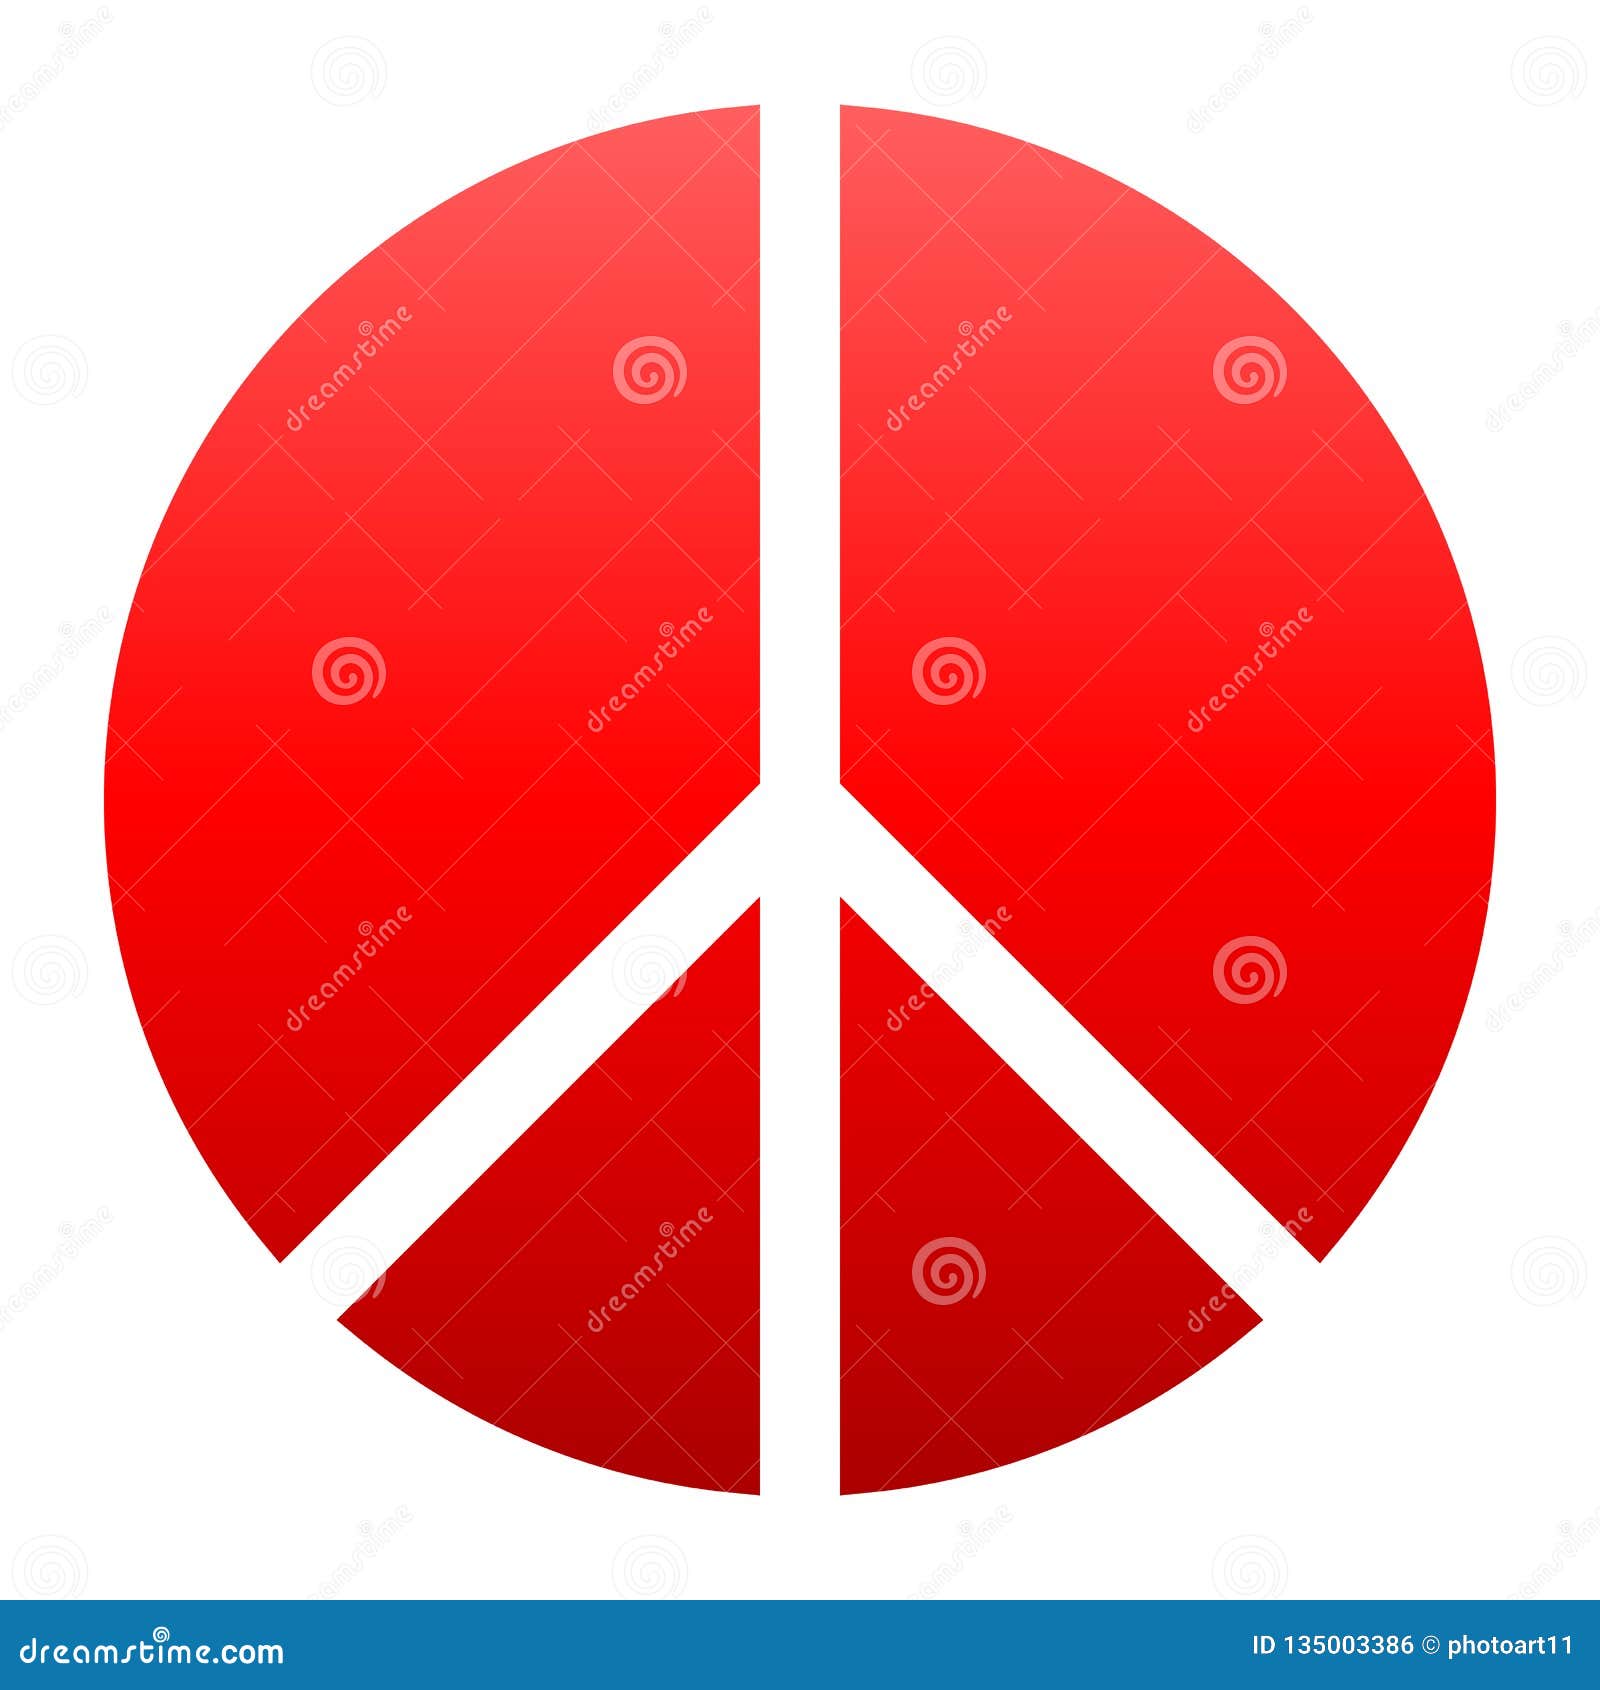 Peace Symbol Icon - Red Simple Gradient, Segmented Shapes, Isolated ...